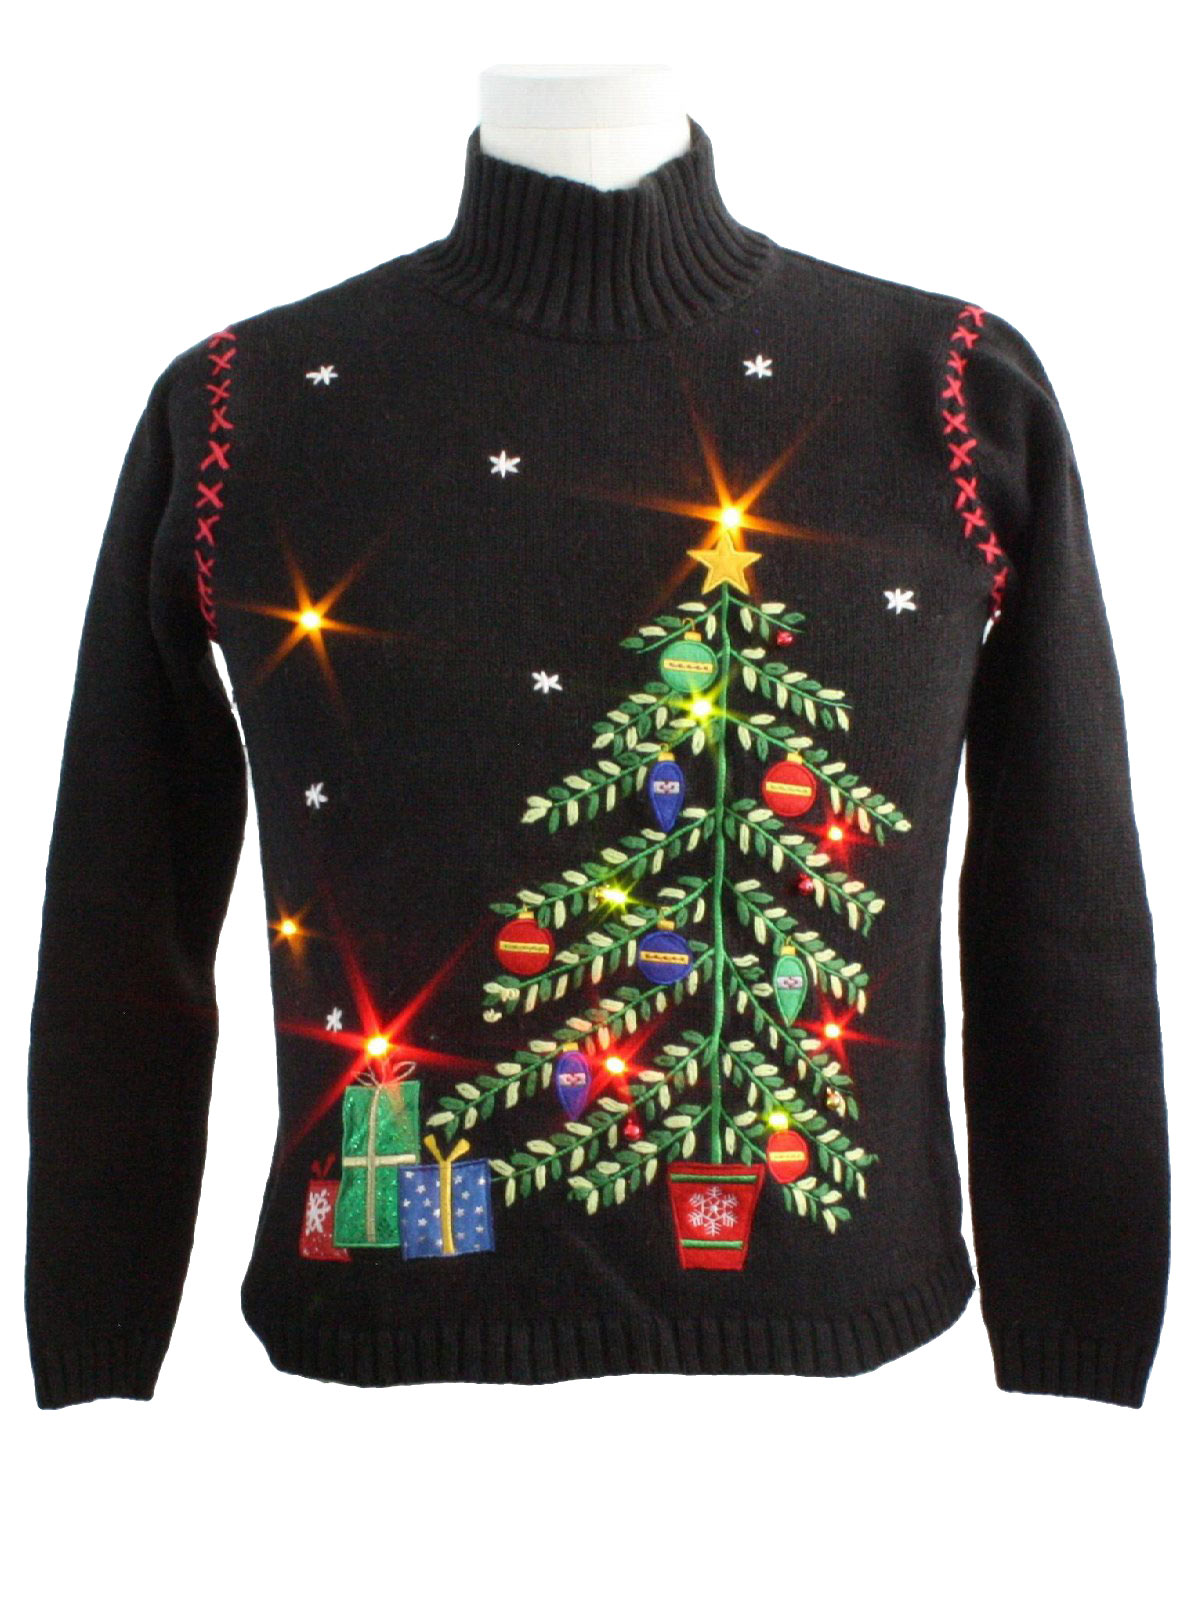 Womens/Girls Lightup Ugly Christmas Sweater: -Classic Elements- Petite ...